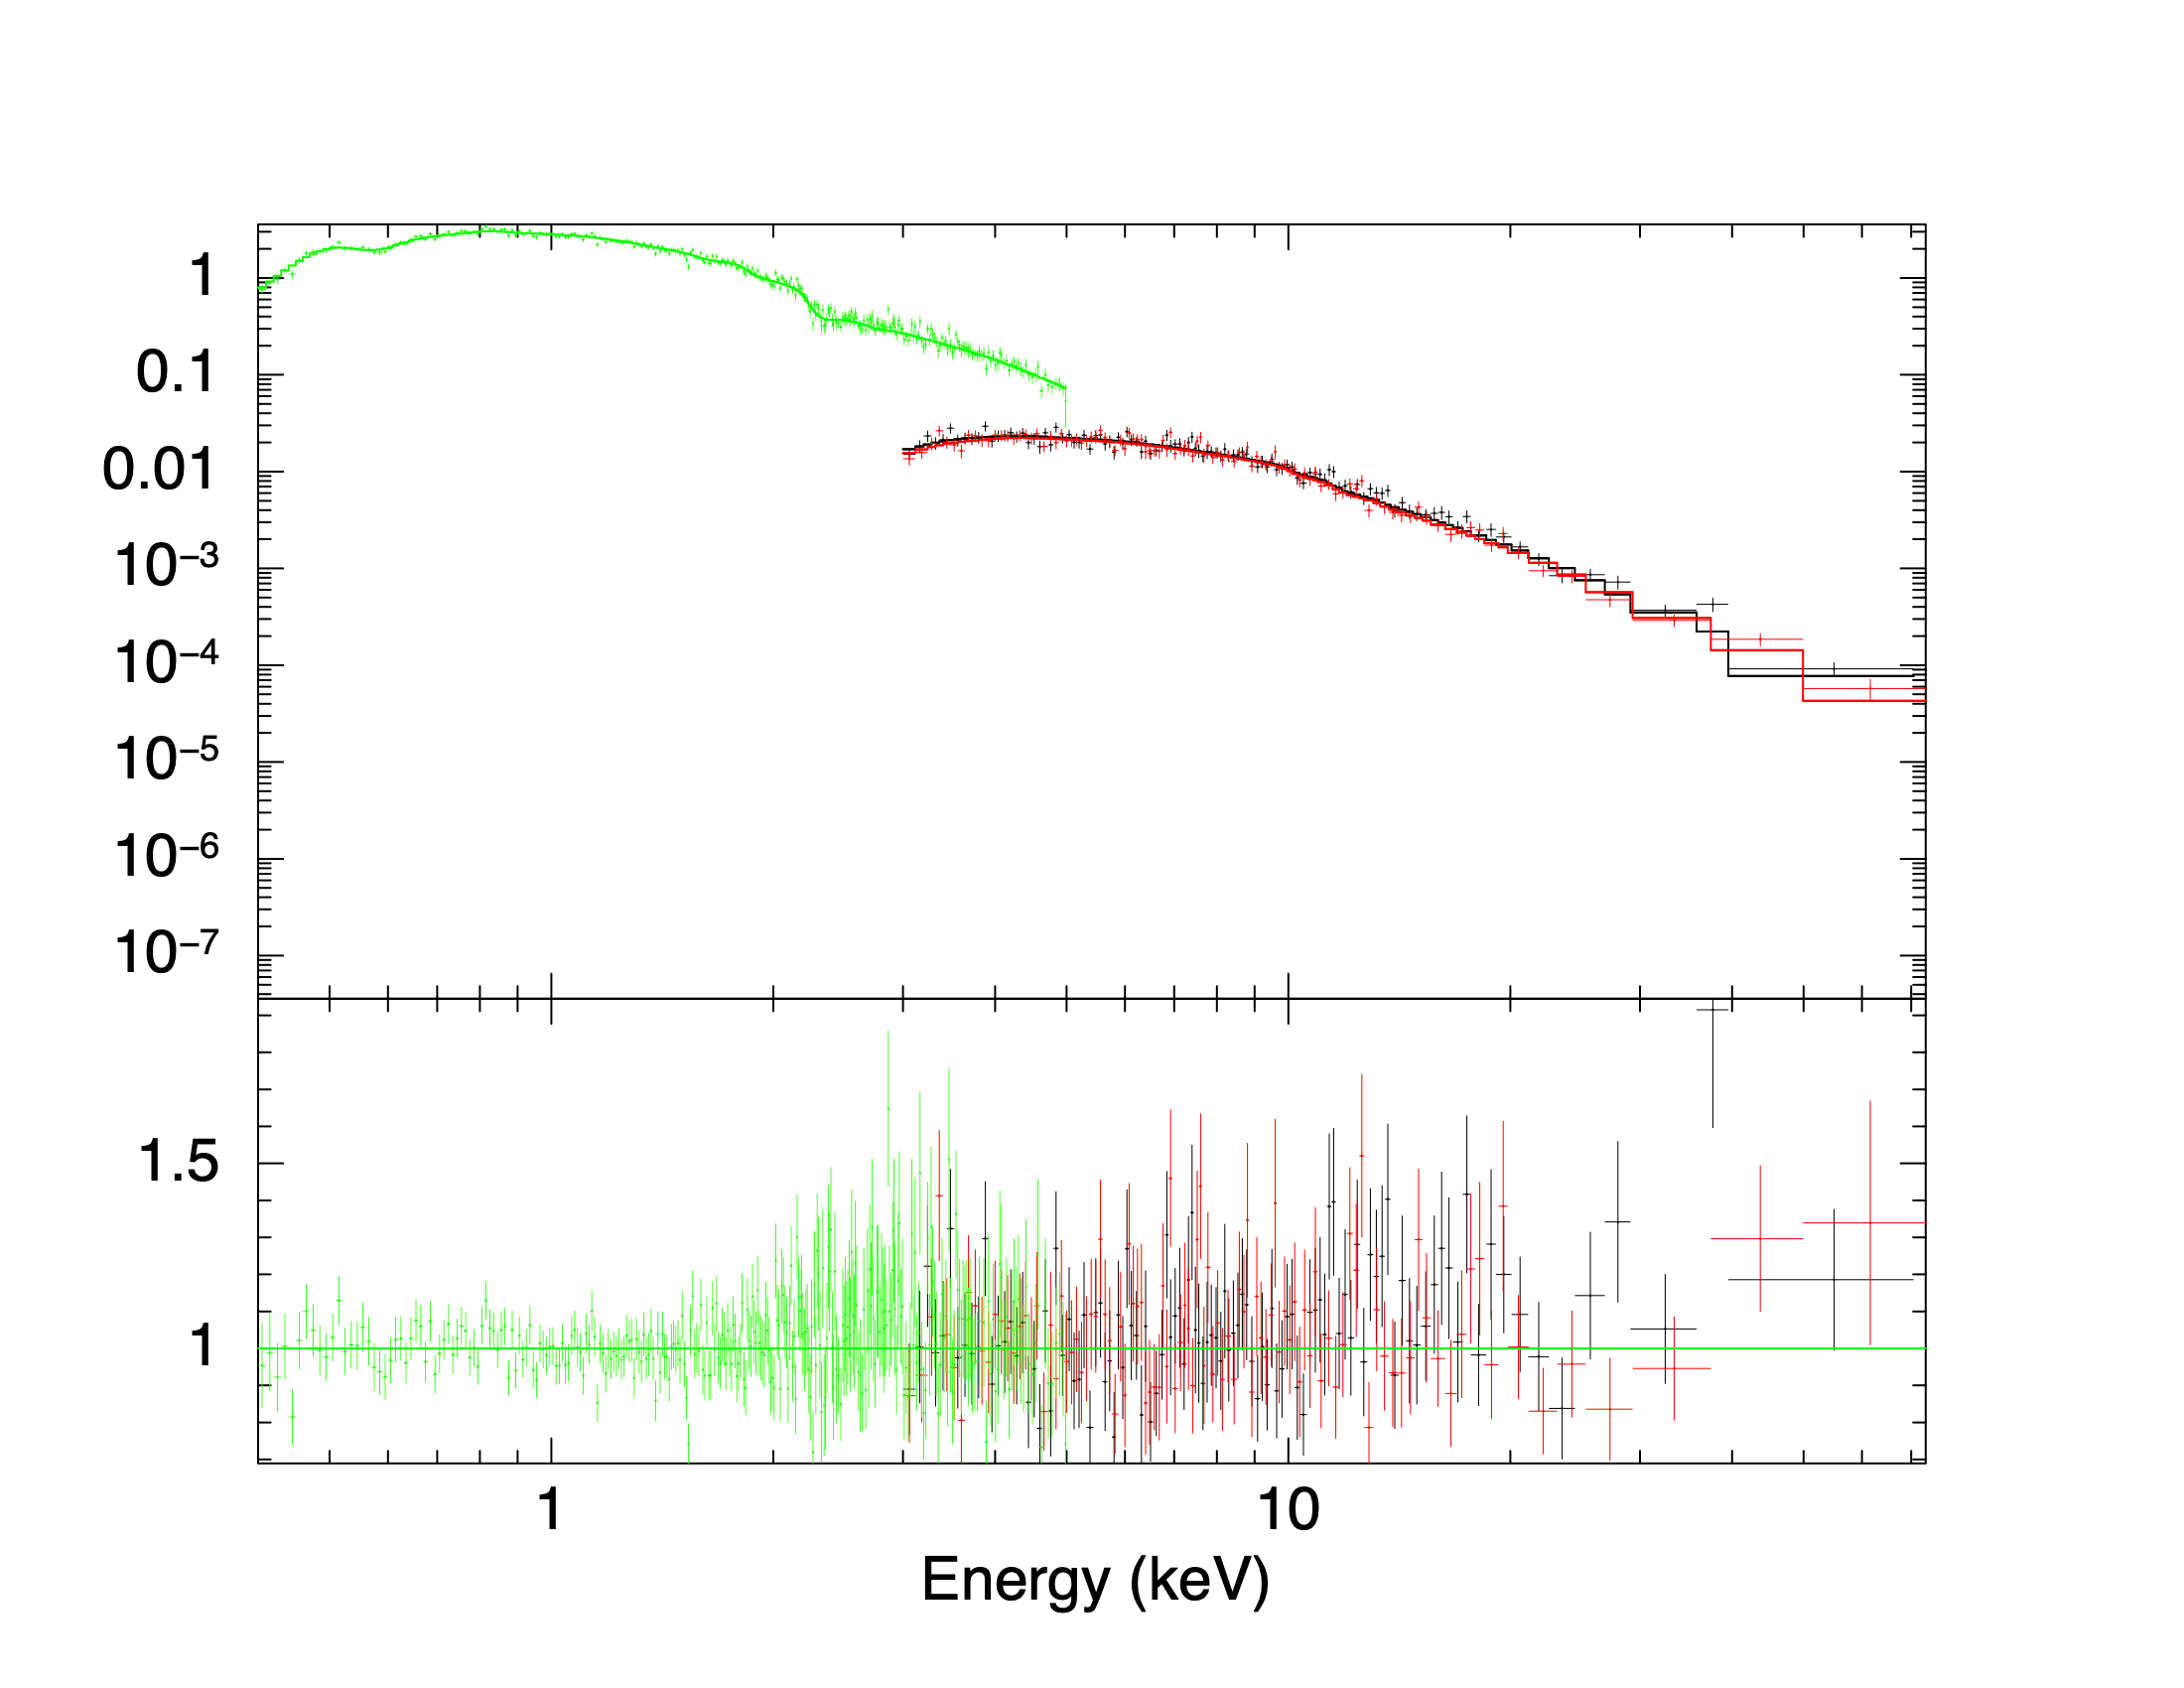 NICER and NuSTAR spectra (upper panel) and residuals (bottom panel) of BL Lacertae collected simultaneously on 11-12 October 2020, fitted in the 0.4Ð79 keV energy band with a broken power-law model. Black, red, and green points represent NuSTAR FPMA, NuSTAR FPMB, and NICER data, respectively.